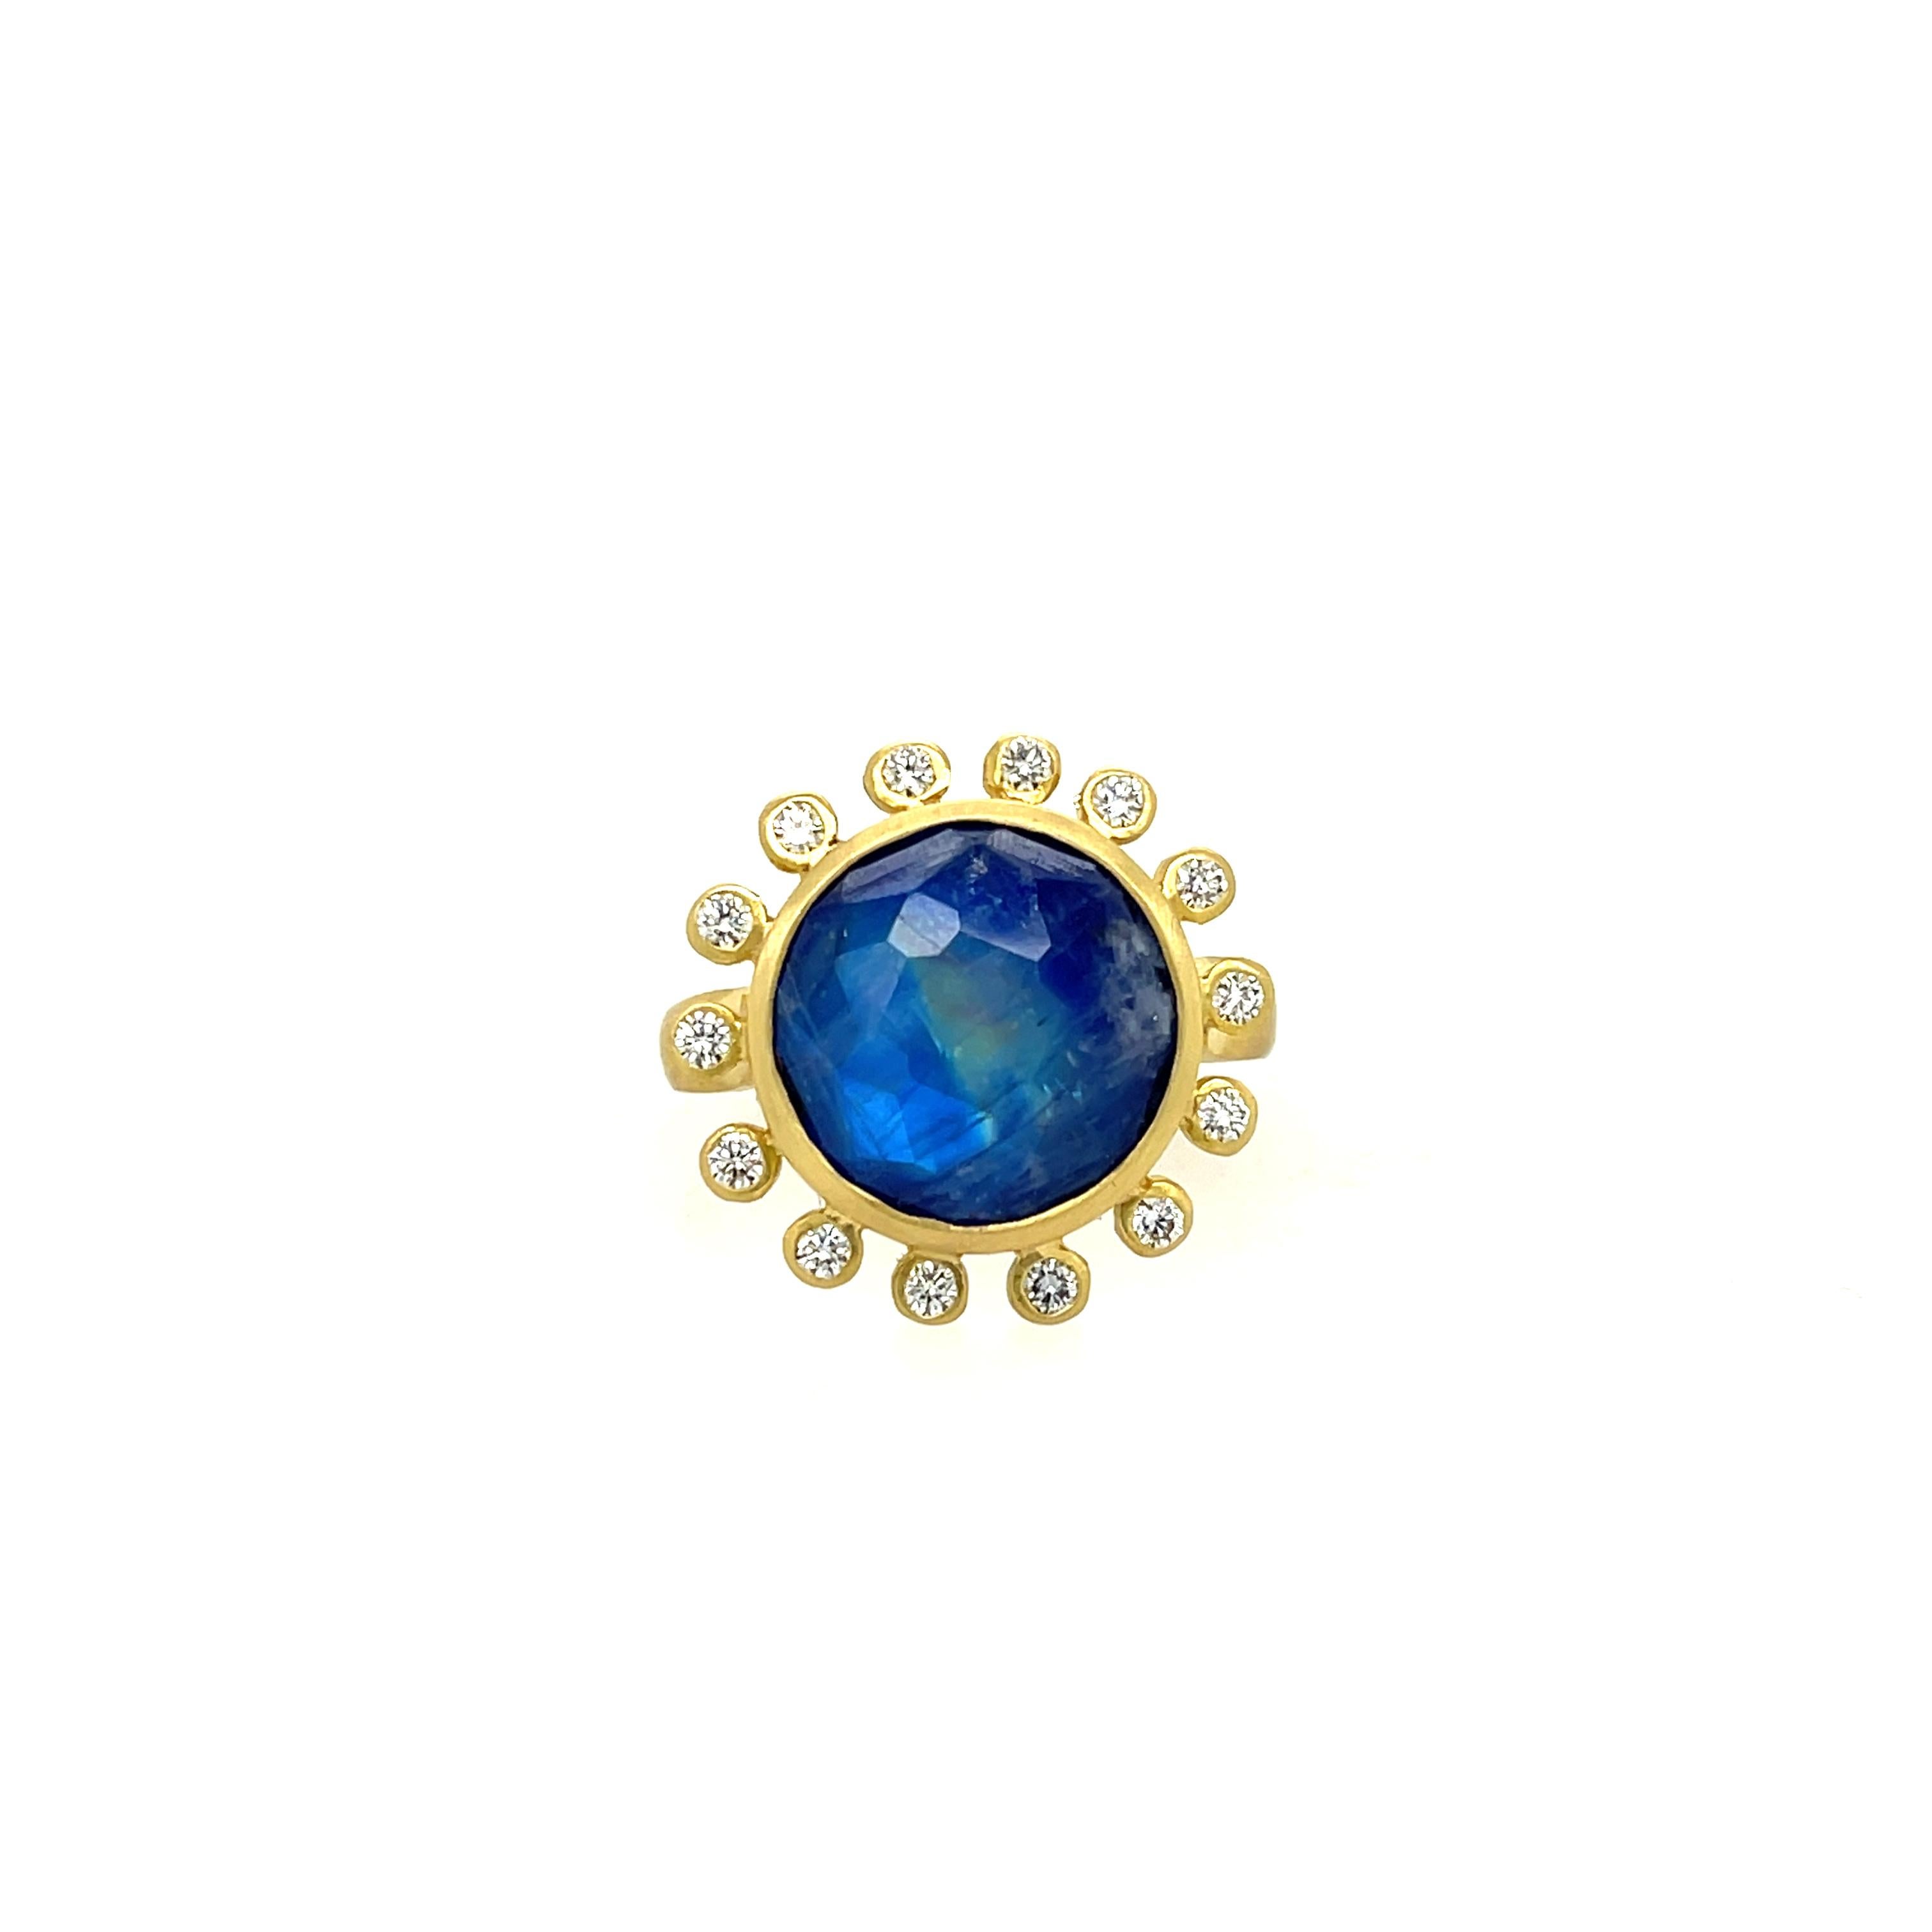 Mazza Lapis Moonstone Doublet and Diamond (0.28ctw) Ring in 14K Yellow Gold. Ring size 6.5
Diameter 0.75